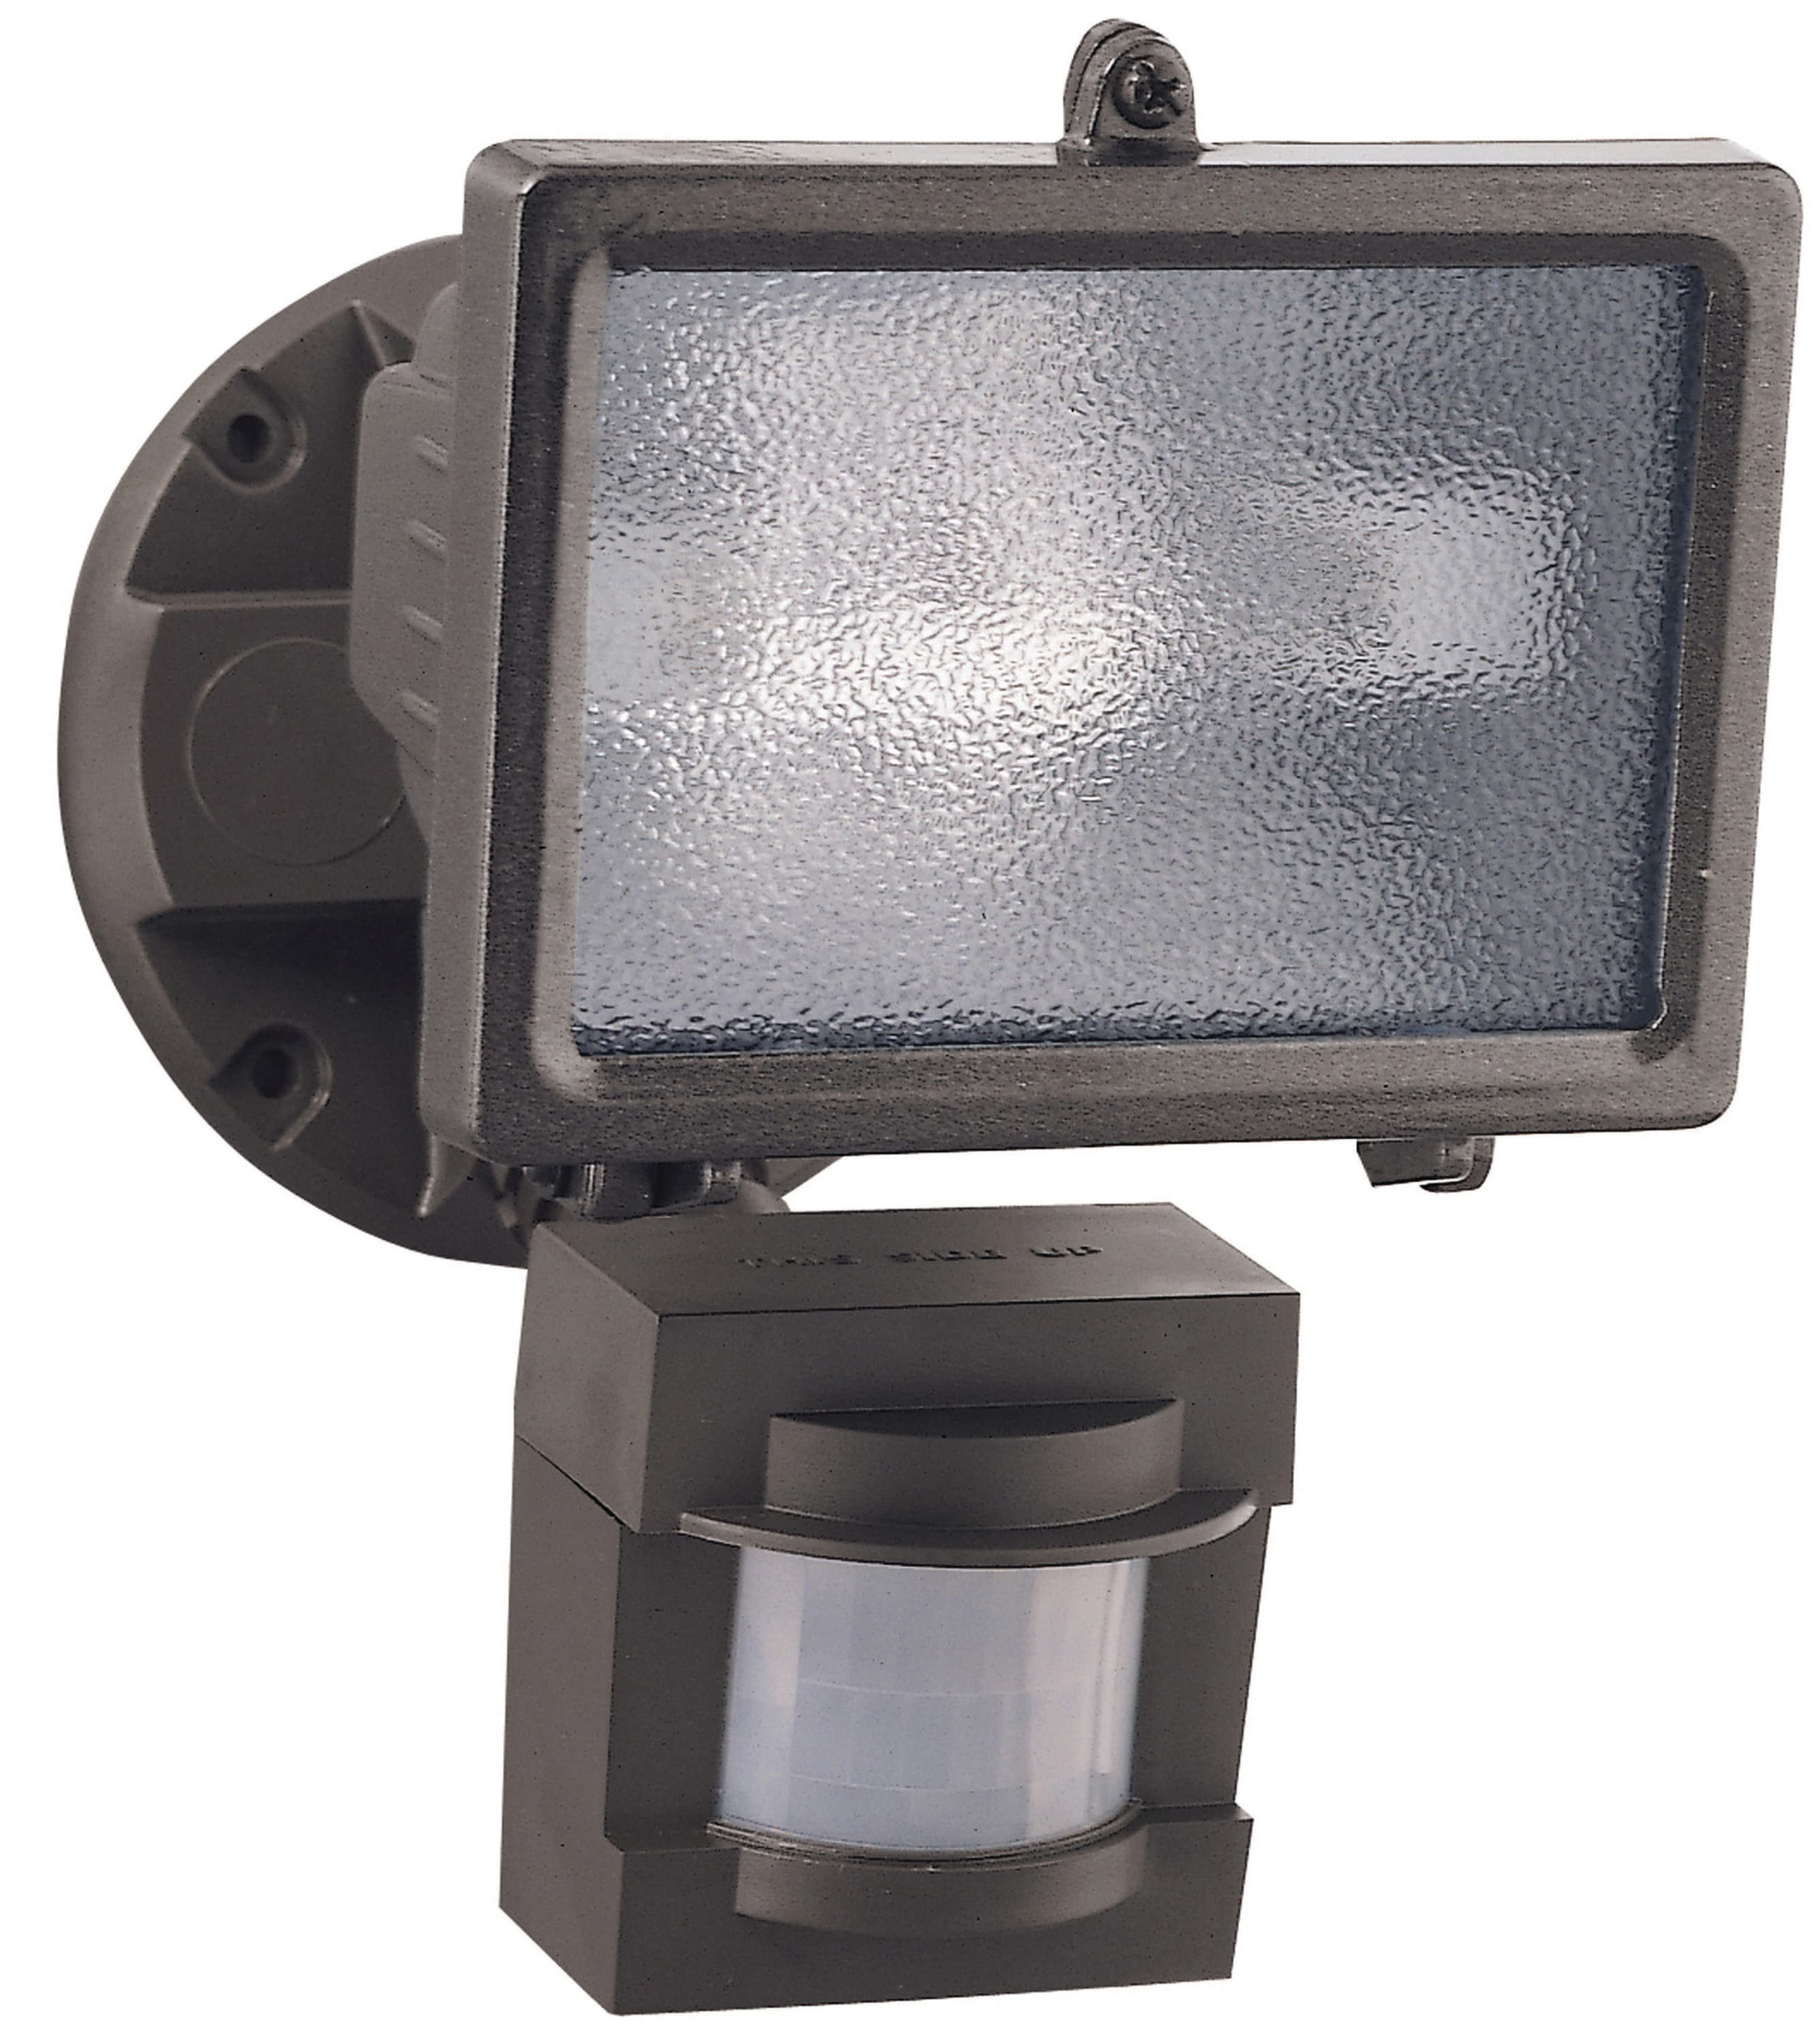 Secure Home 110-Degree Hardwired Halogen 1-Head Motion-Activated Flood  Light with Timer at